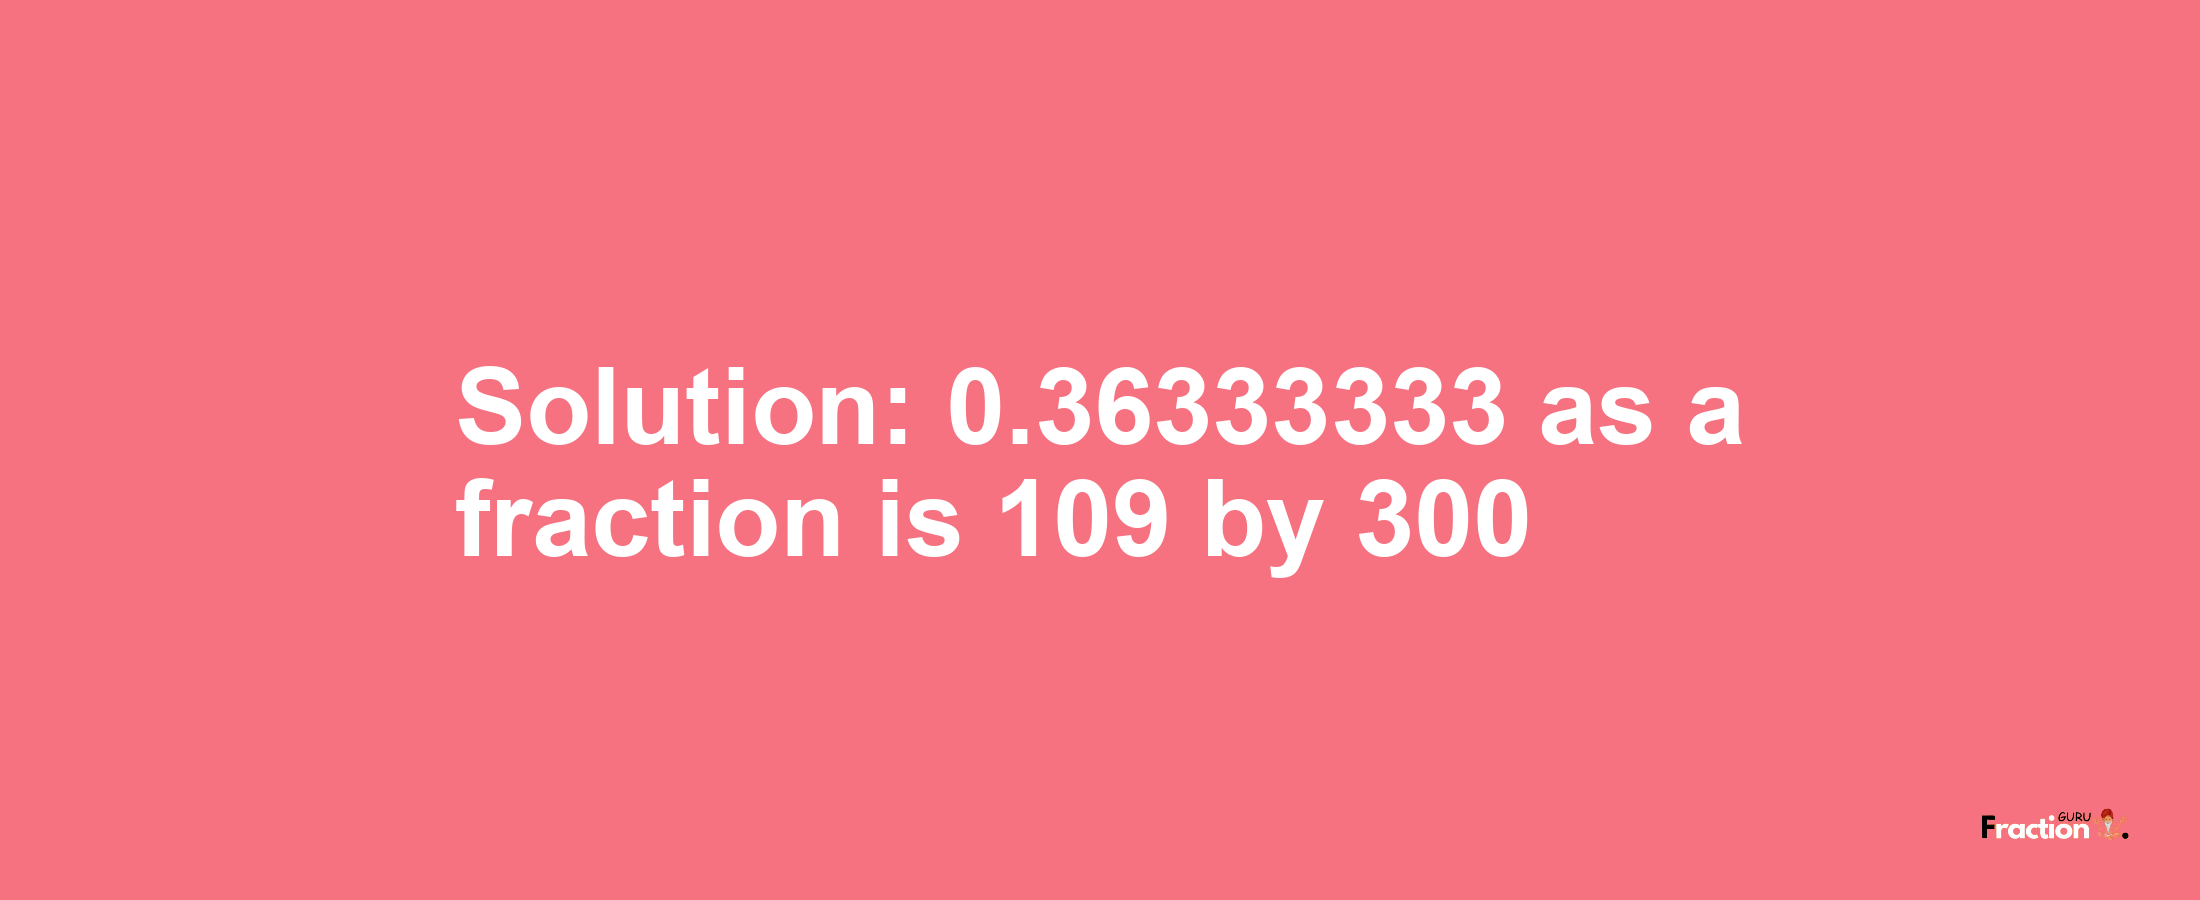 Solution:0.36333333 as a fraction is 109/300